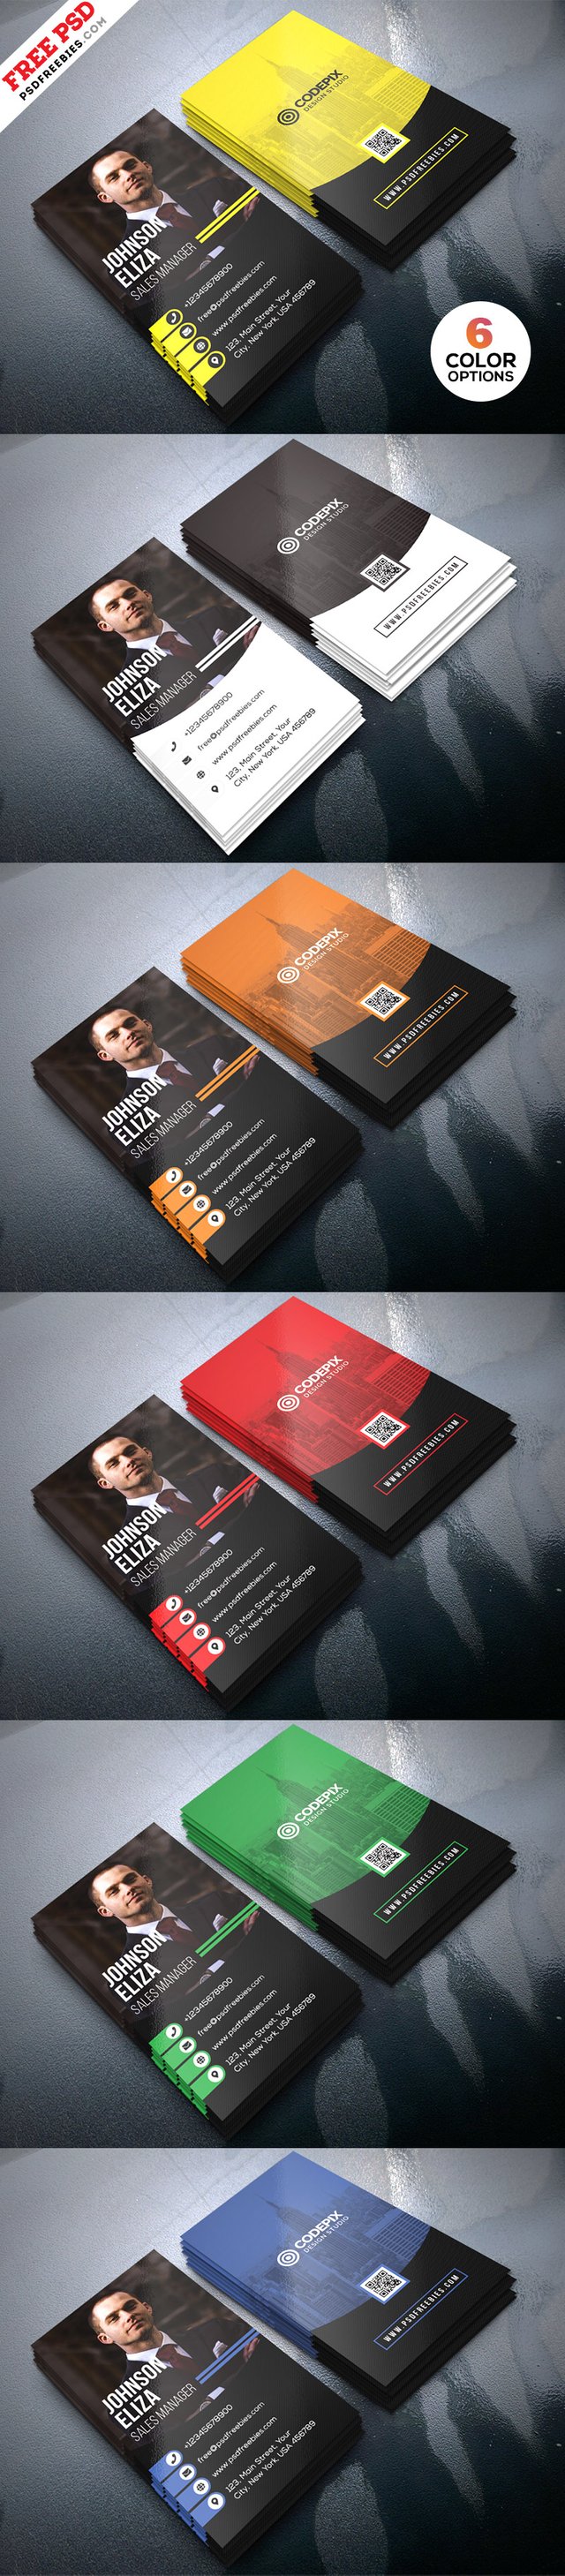 Modern-Corporate-Business-Cards-Design-PSD-Preview.jpg